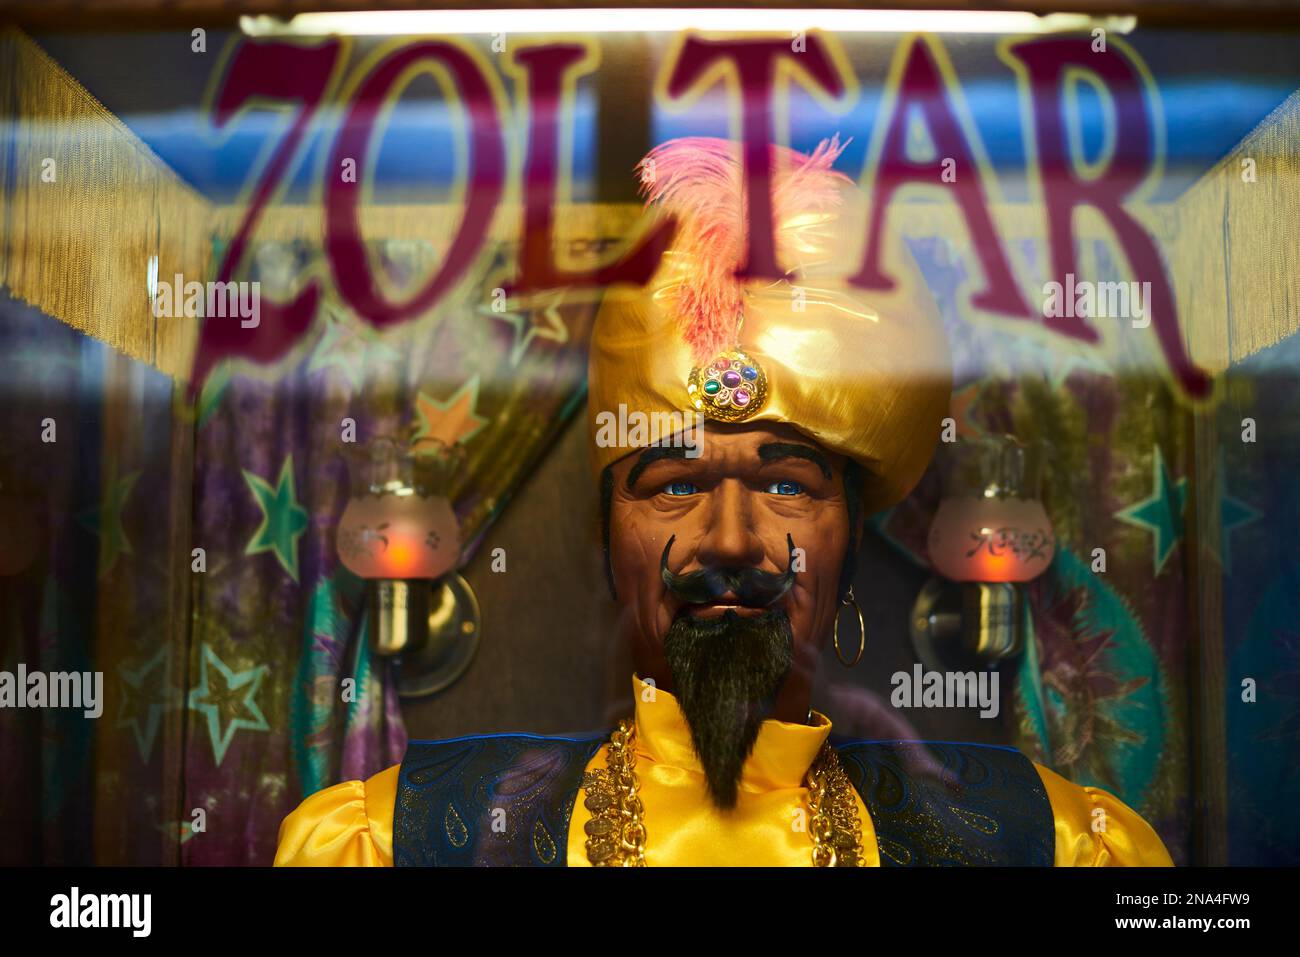 Zoltar, Coney Island coin-operated mechanical fortune teller; Coney Island, New York, United States of America Stock Photo